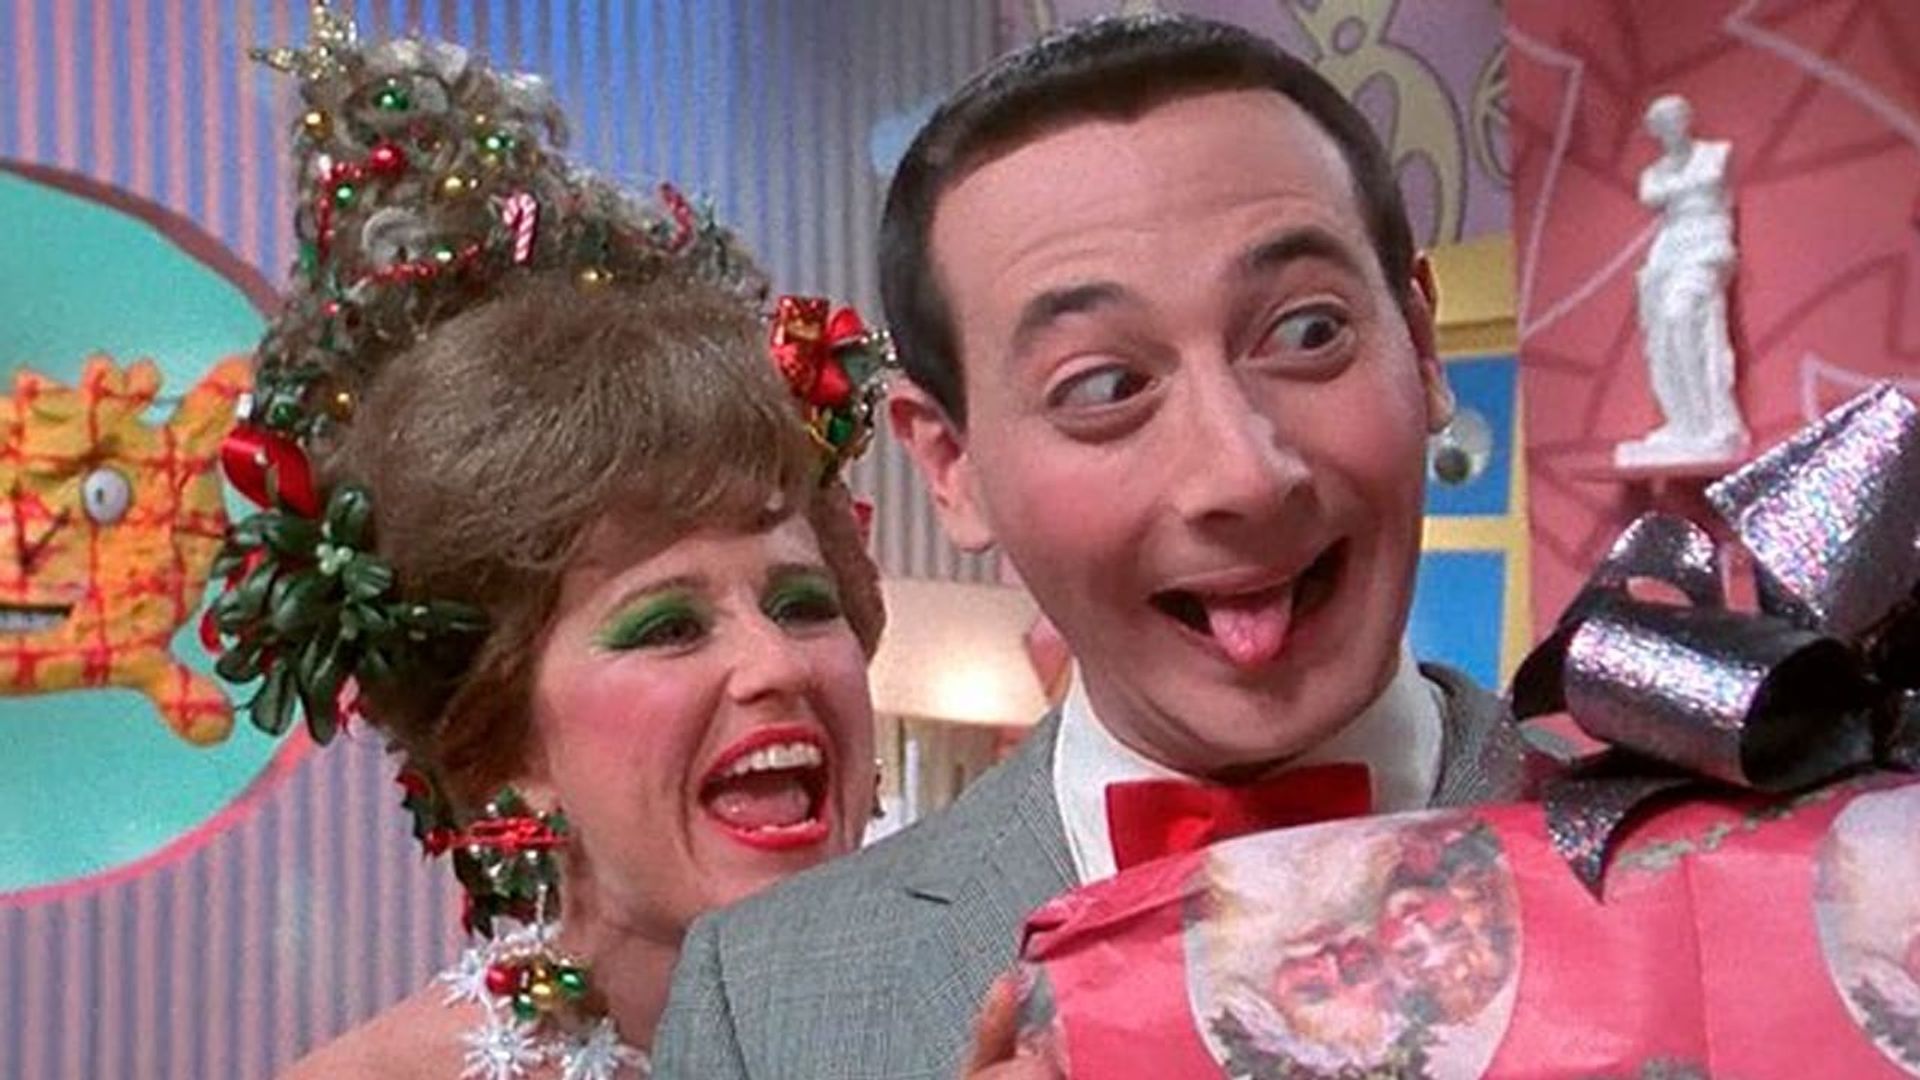 Christmas at Pee-wee's Playhouse background